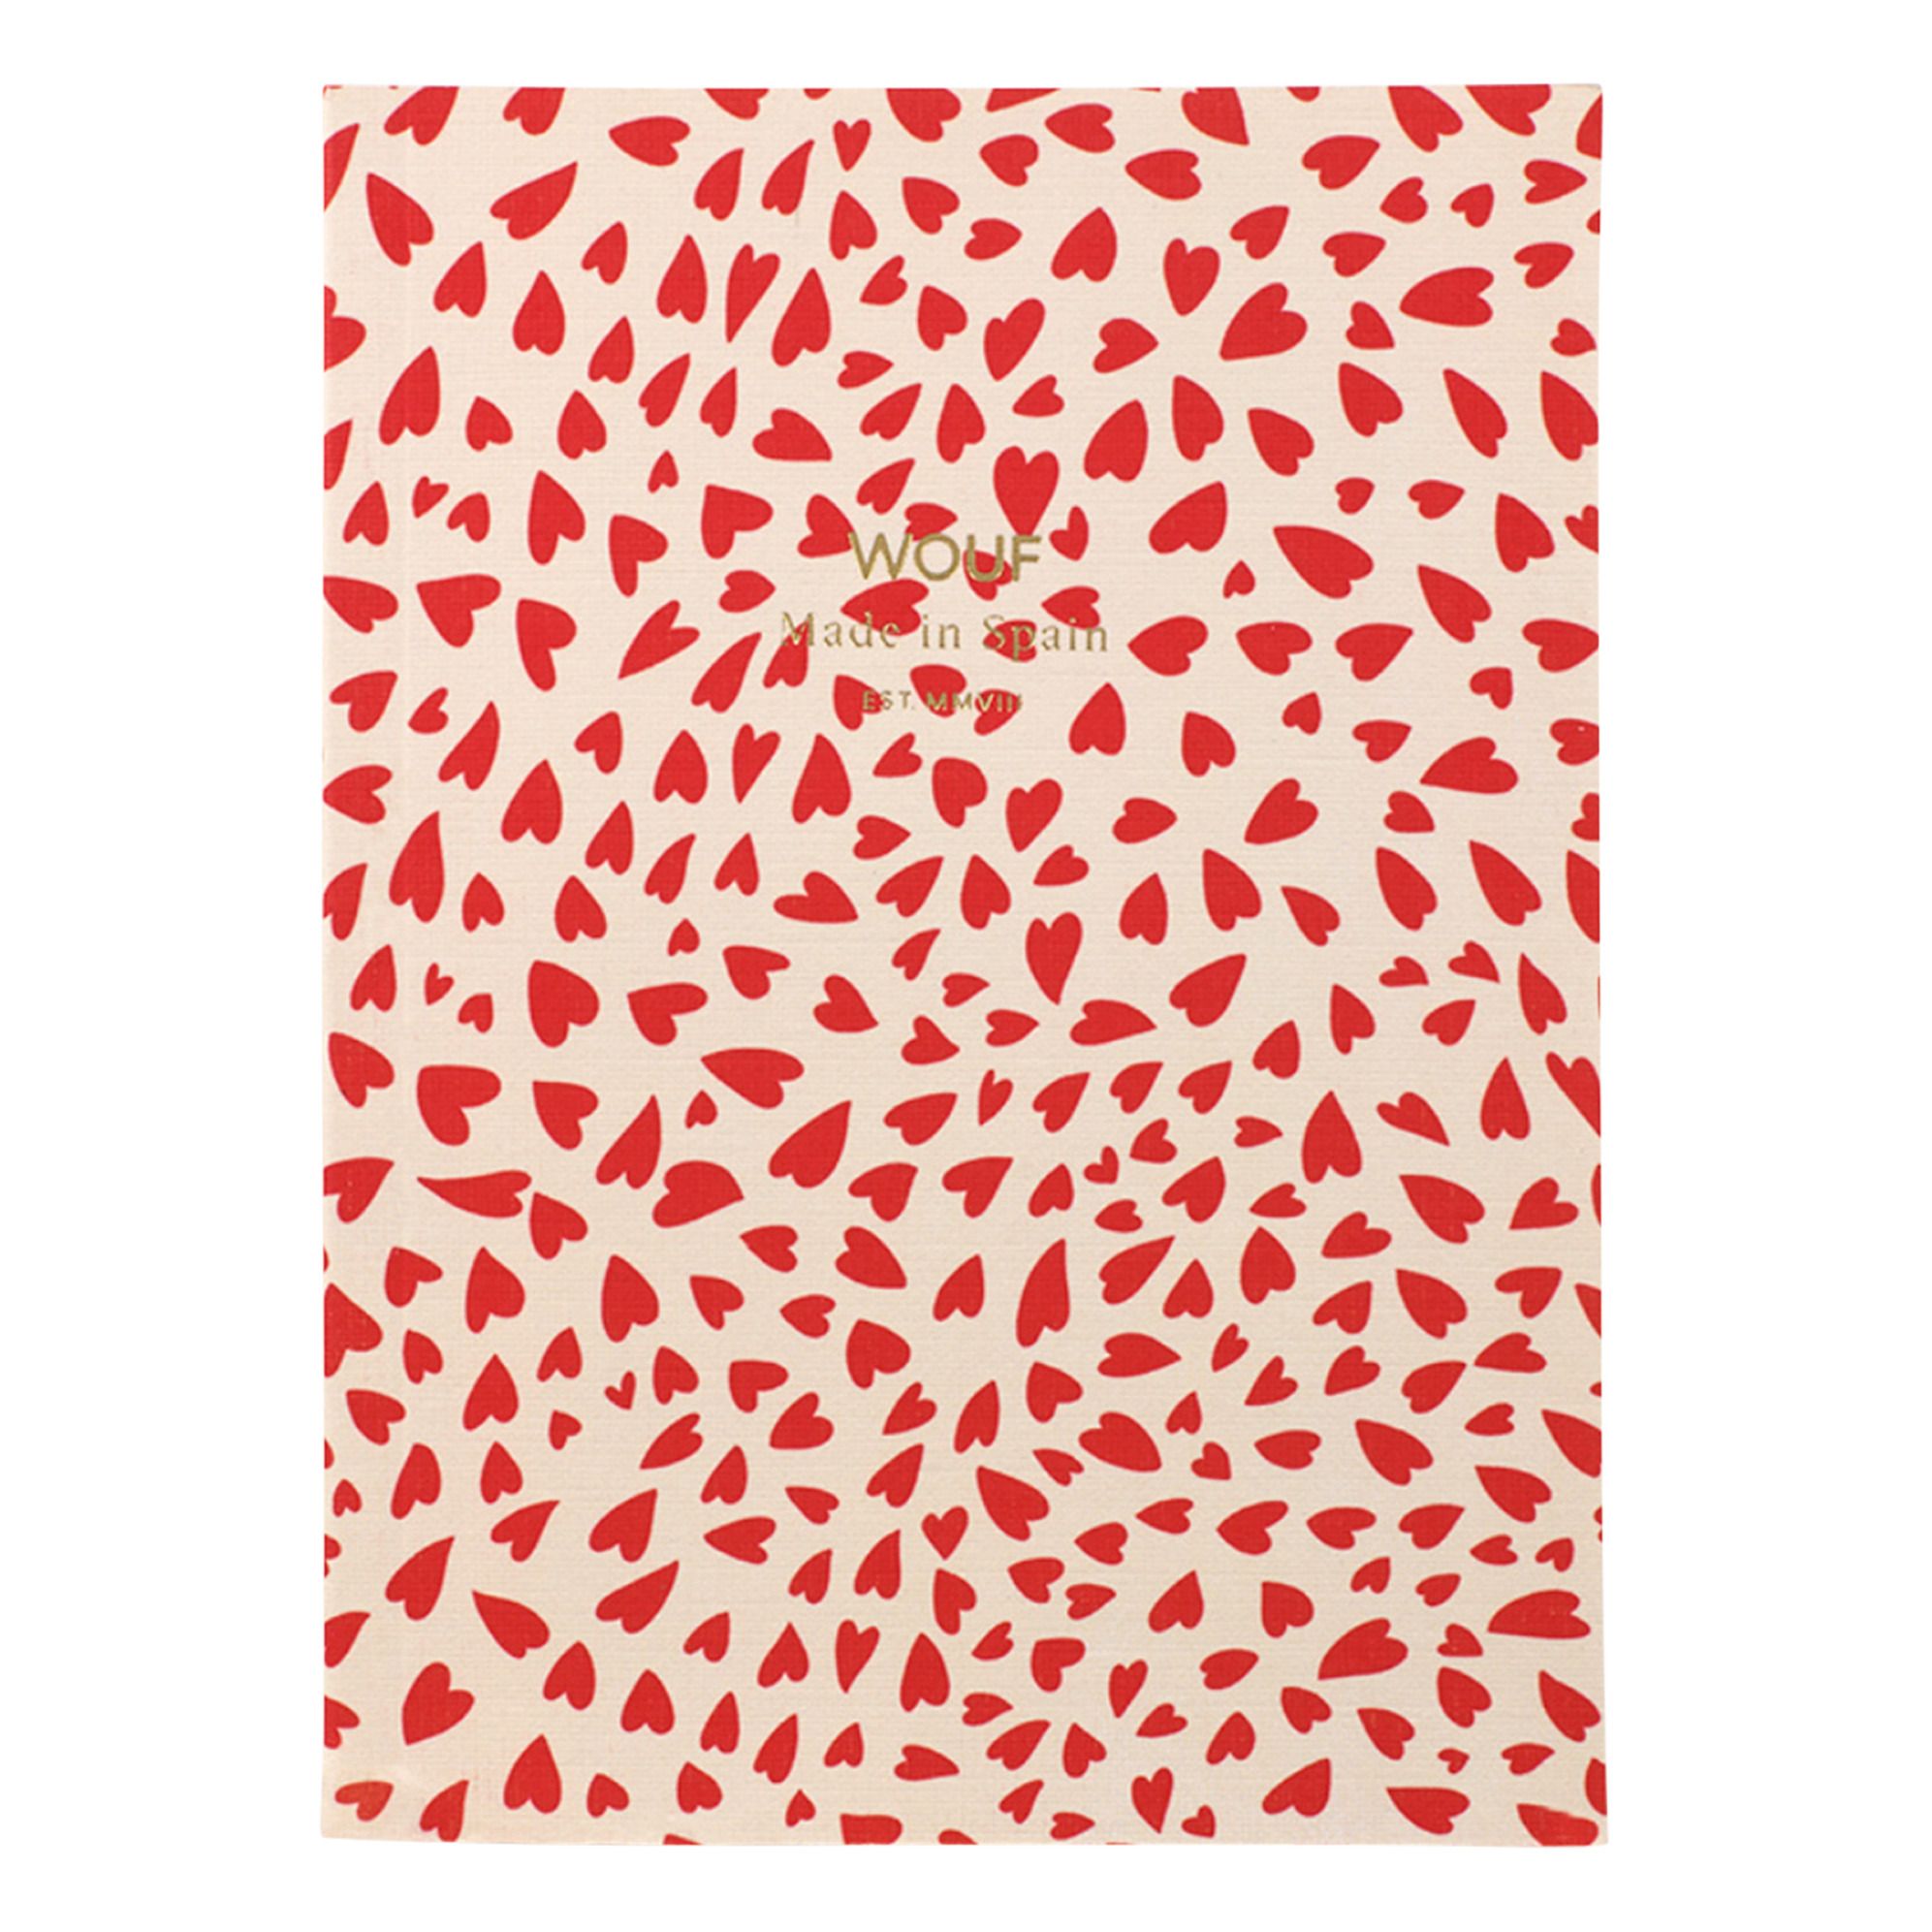 Wouf - Carnet A6 Heart - Rouge